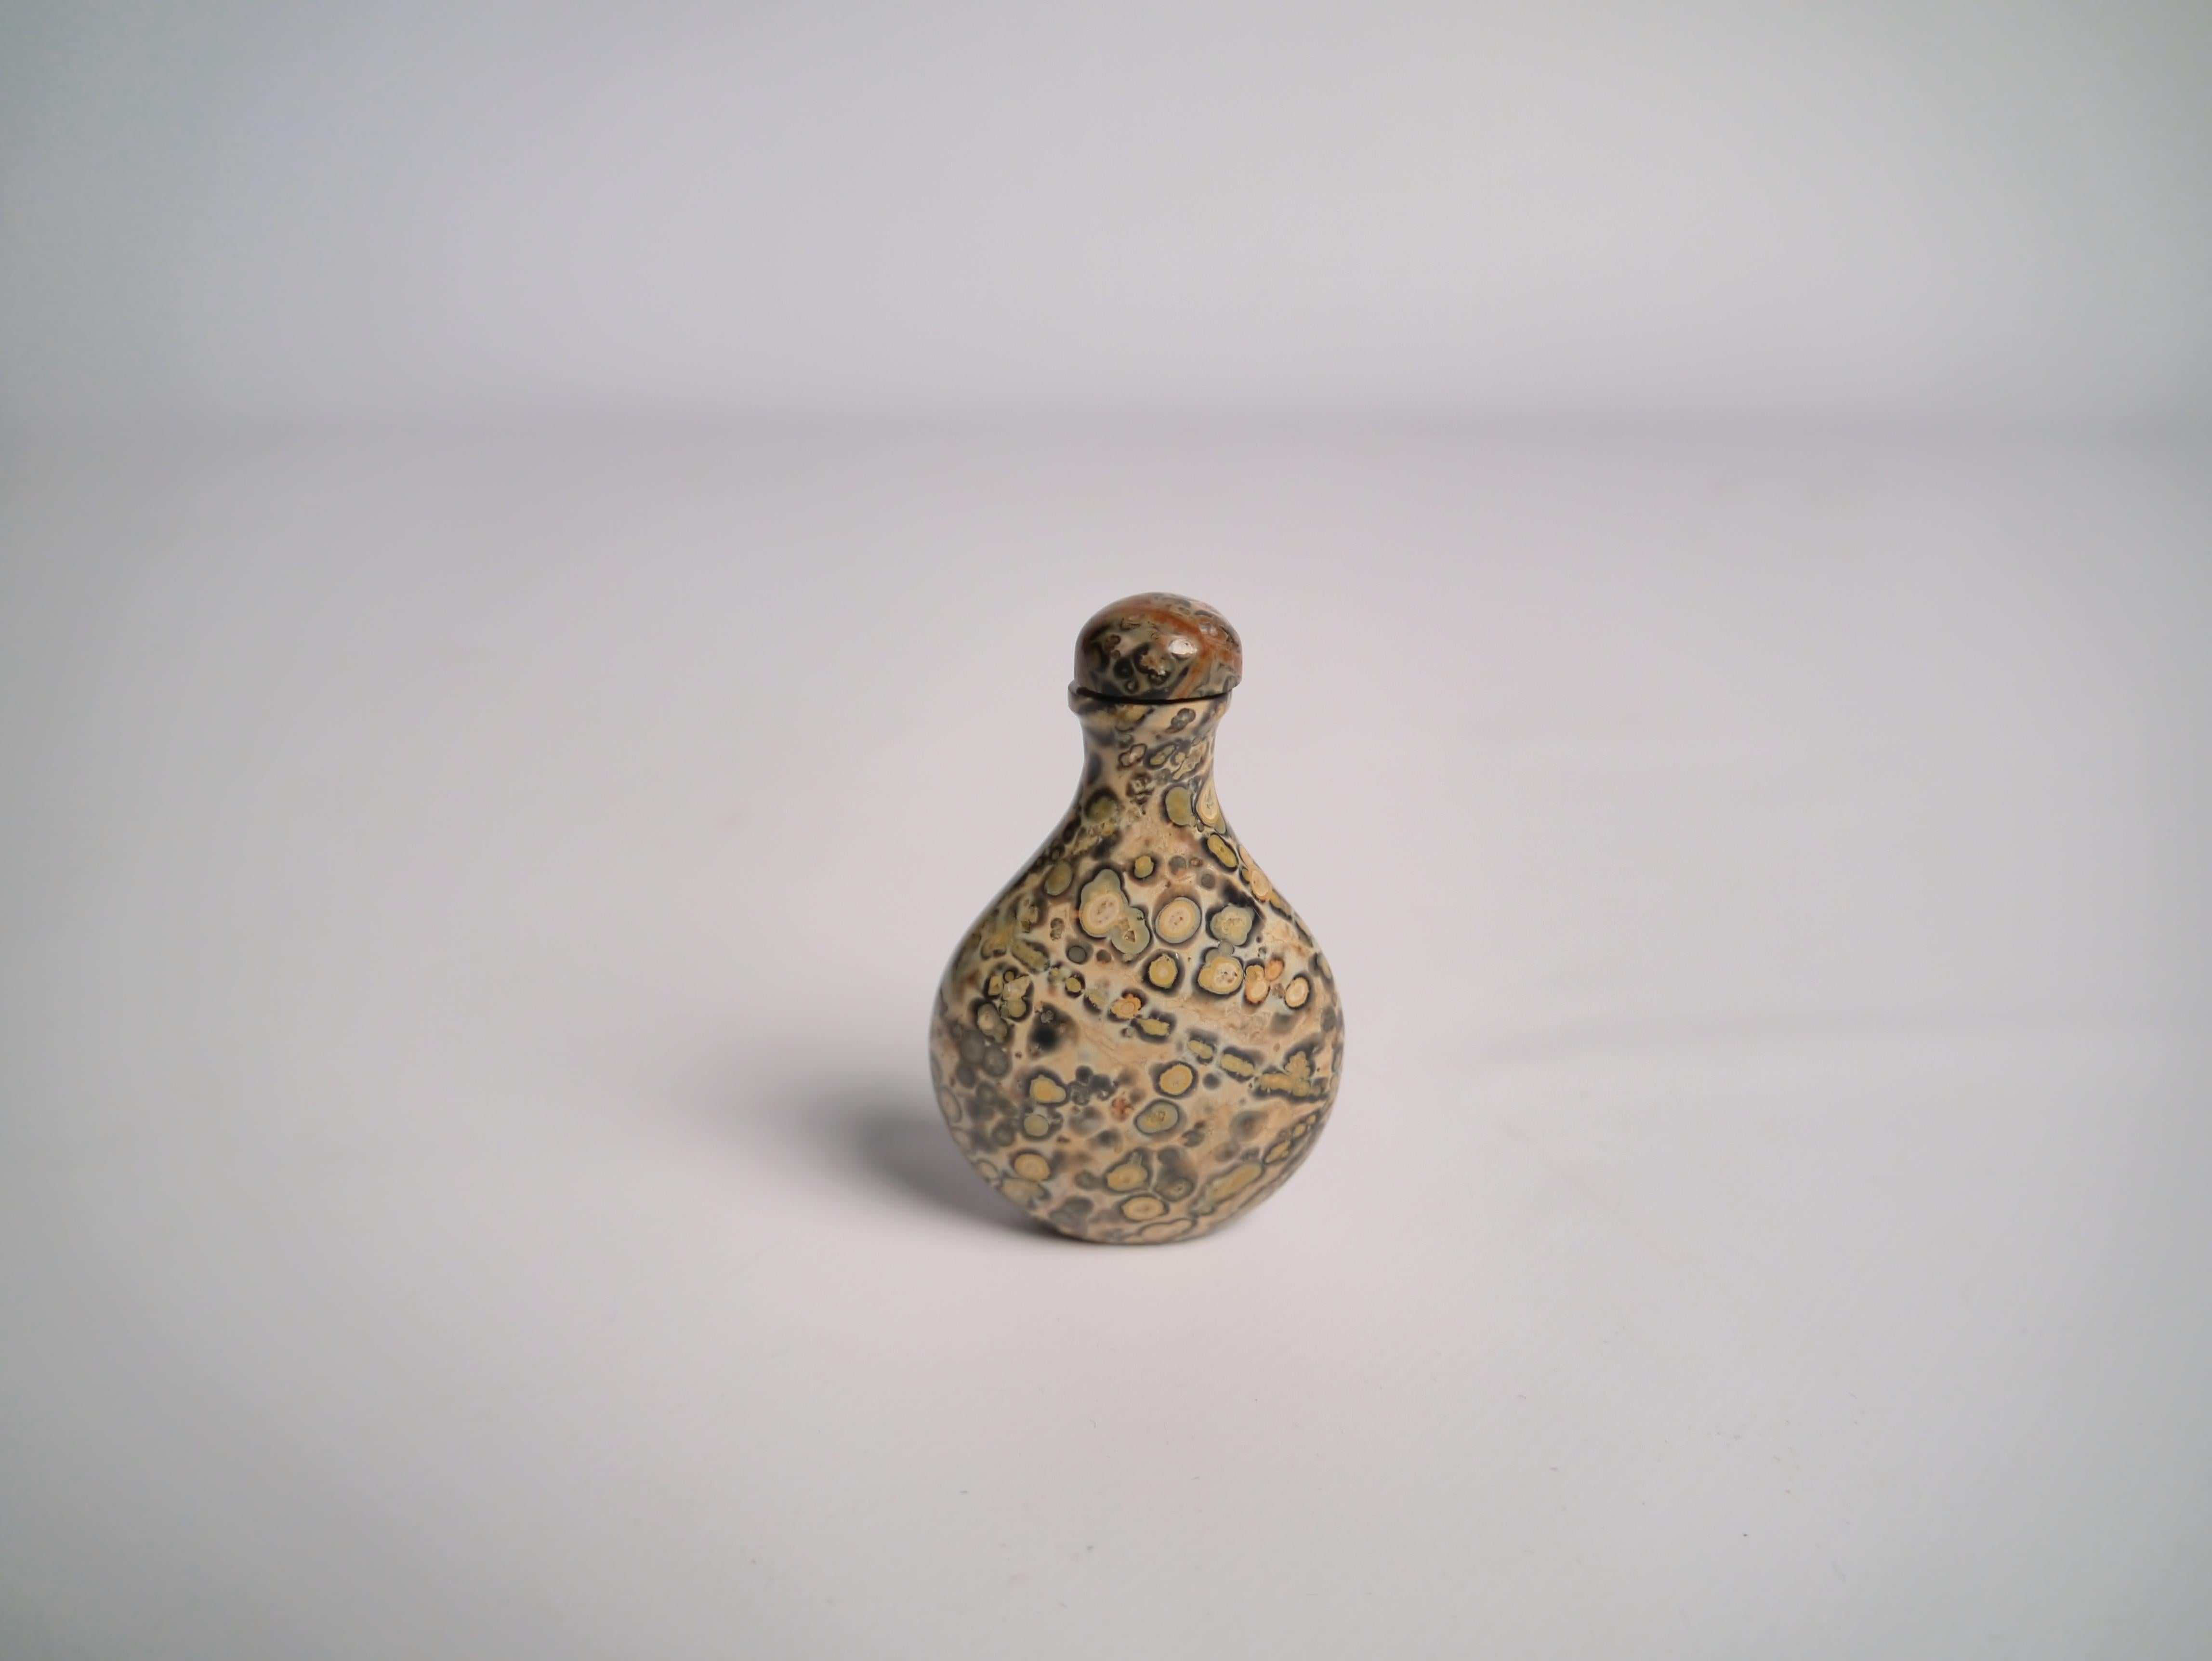 19th century Chinese snuff bottle. Hand carved in a richly marbled puddingstone. Both bottle and tap made of same material.